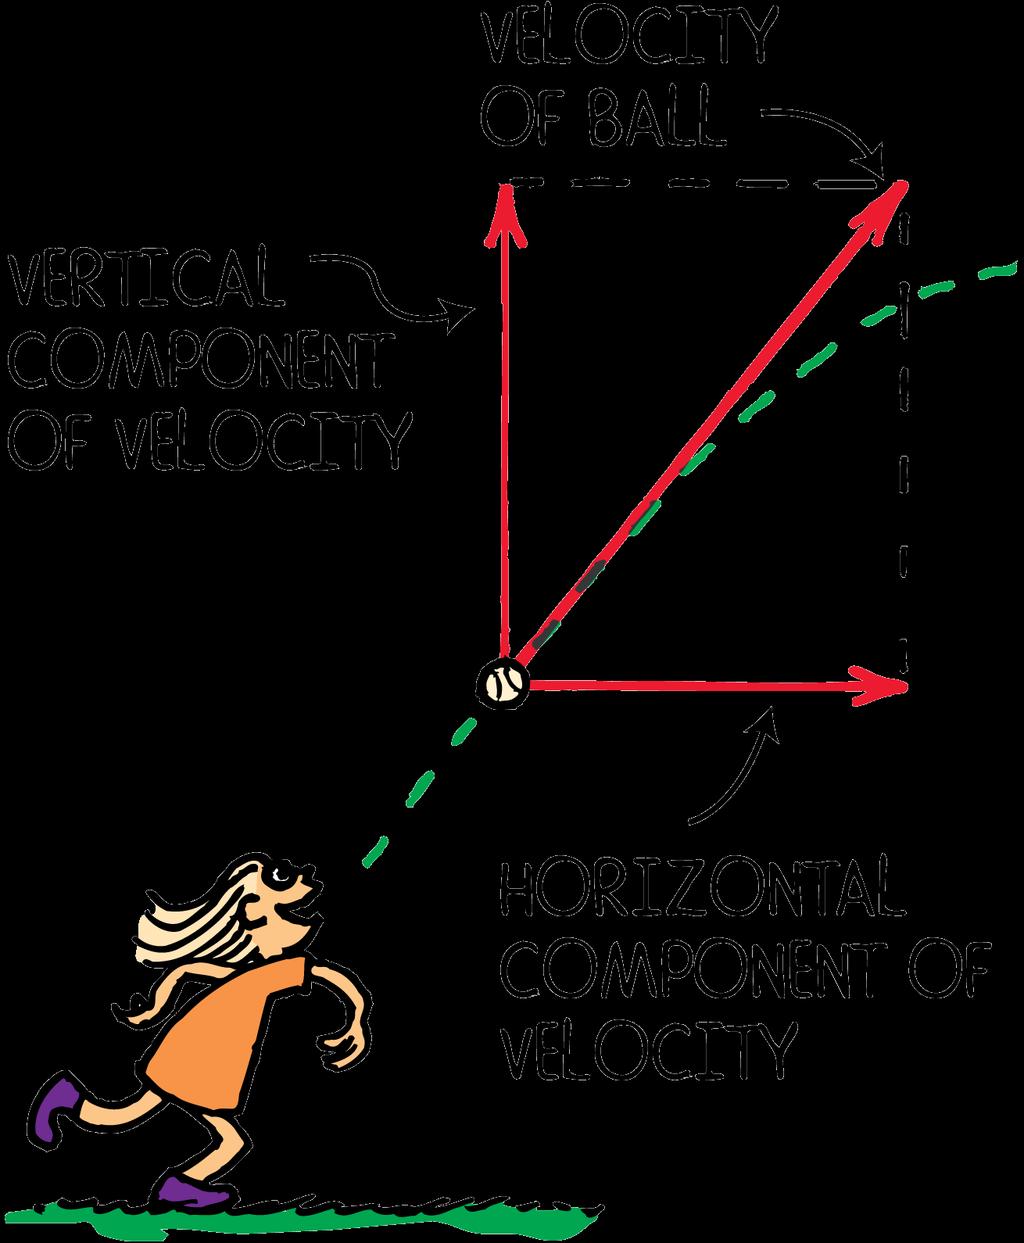 nts Motion of Vectors in 2 directions: Components of velocity can be resolved